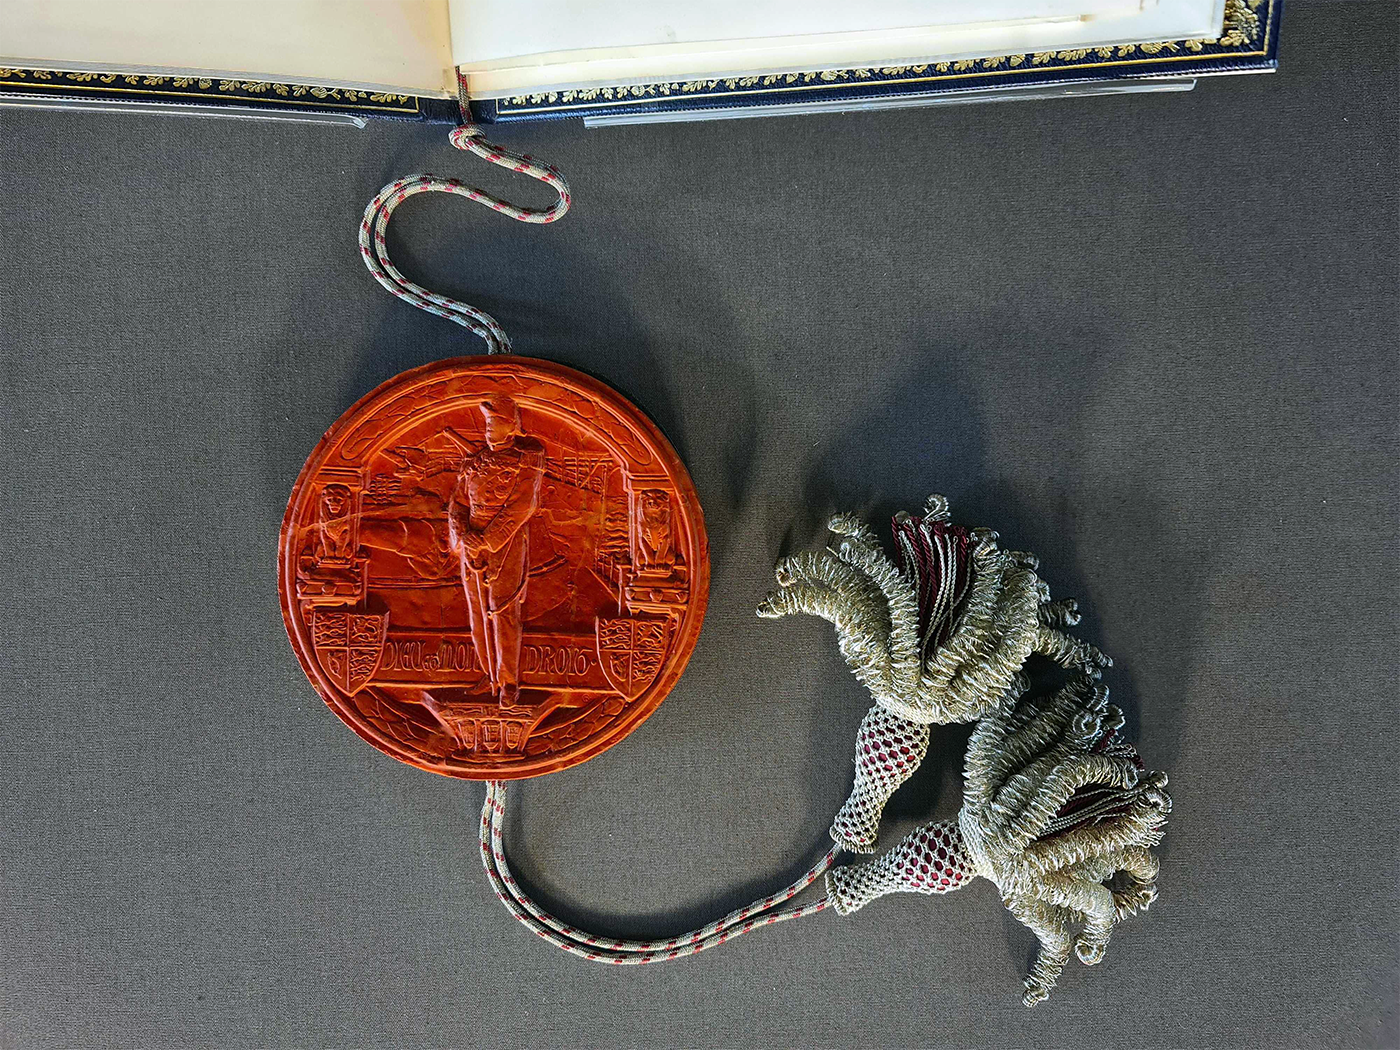 The bottom of the volume with a large, patterned red circle attached with string and tassels.